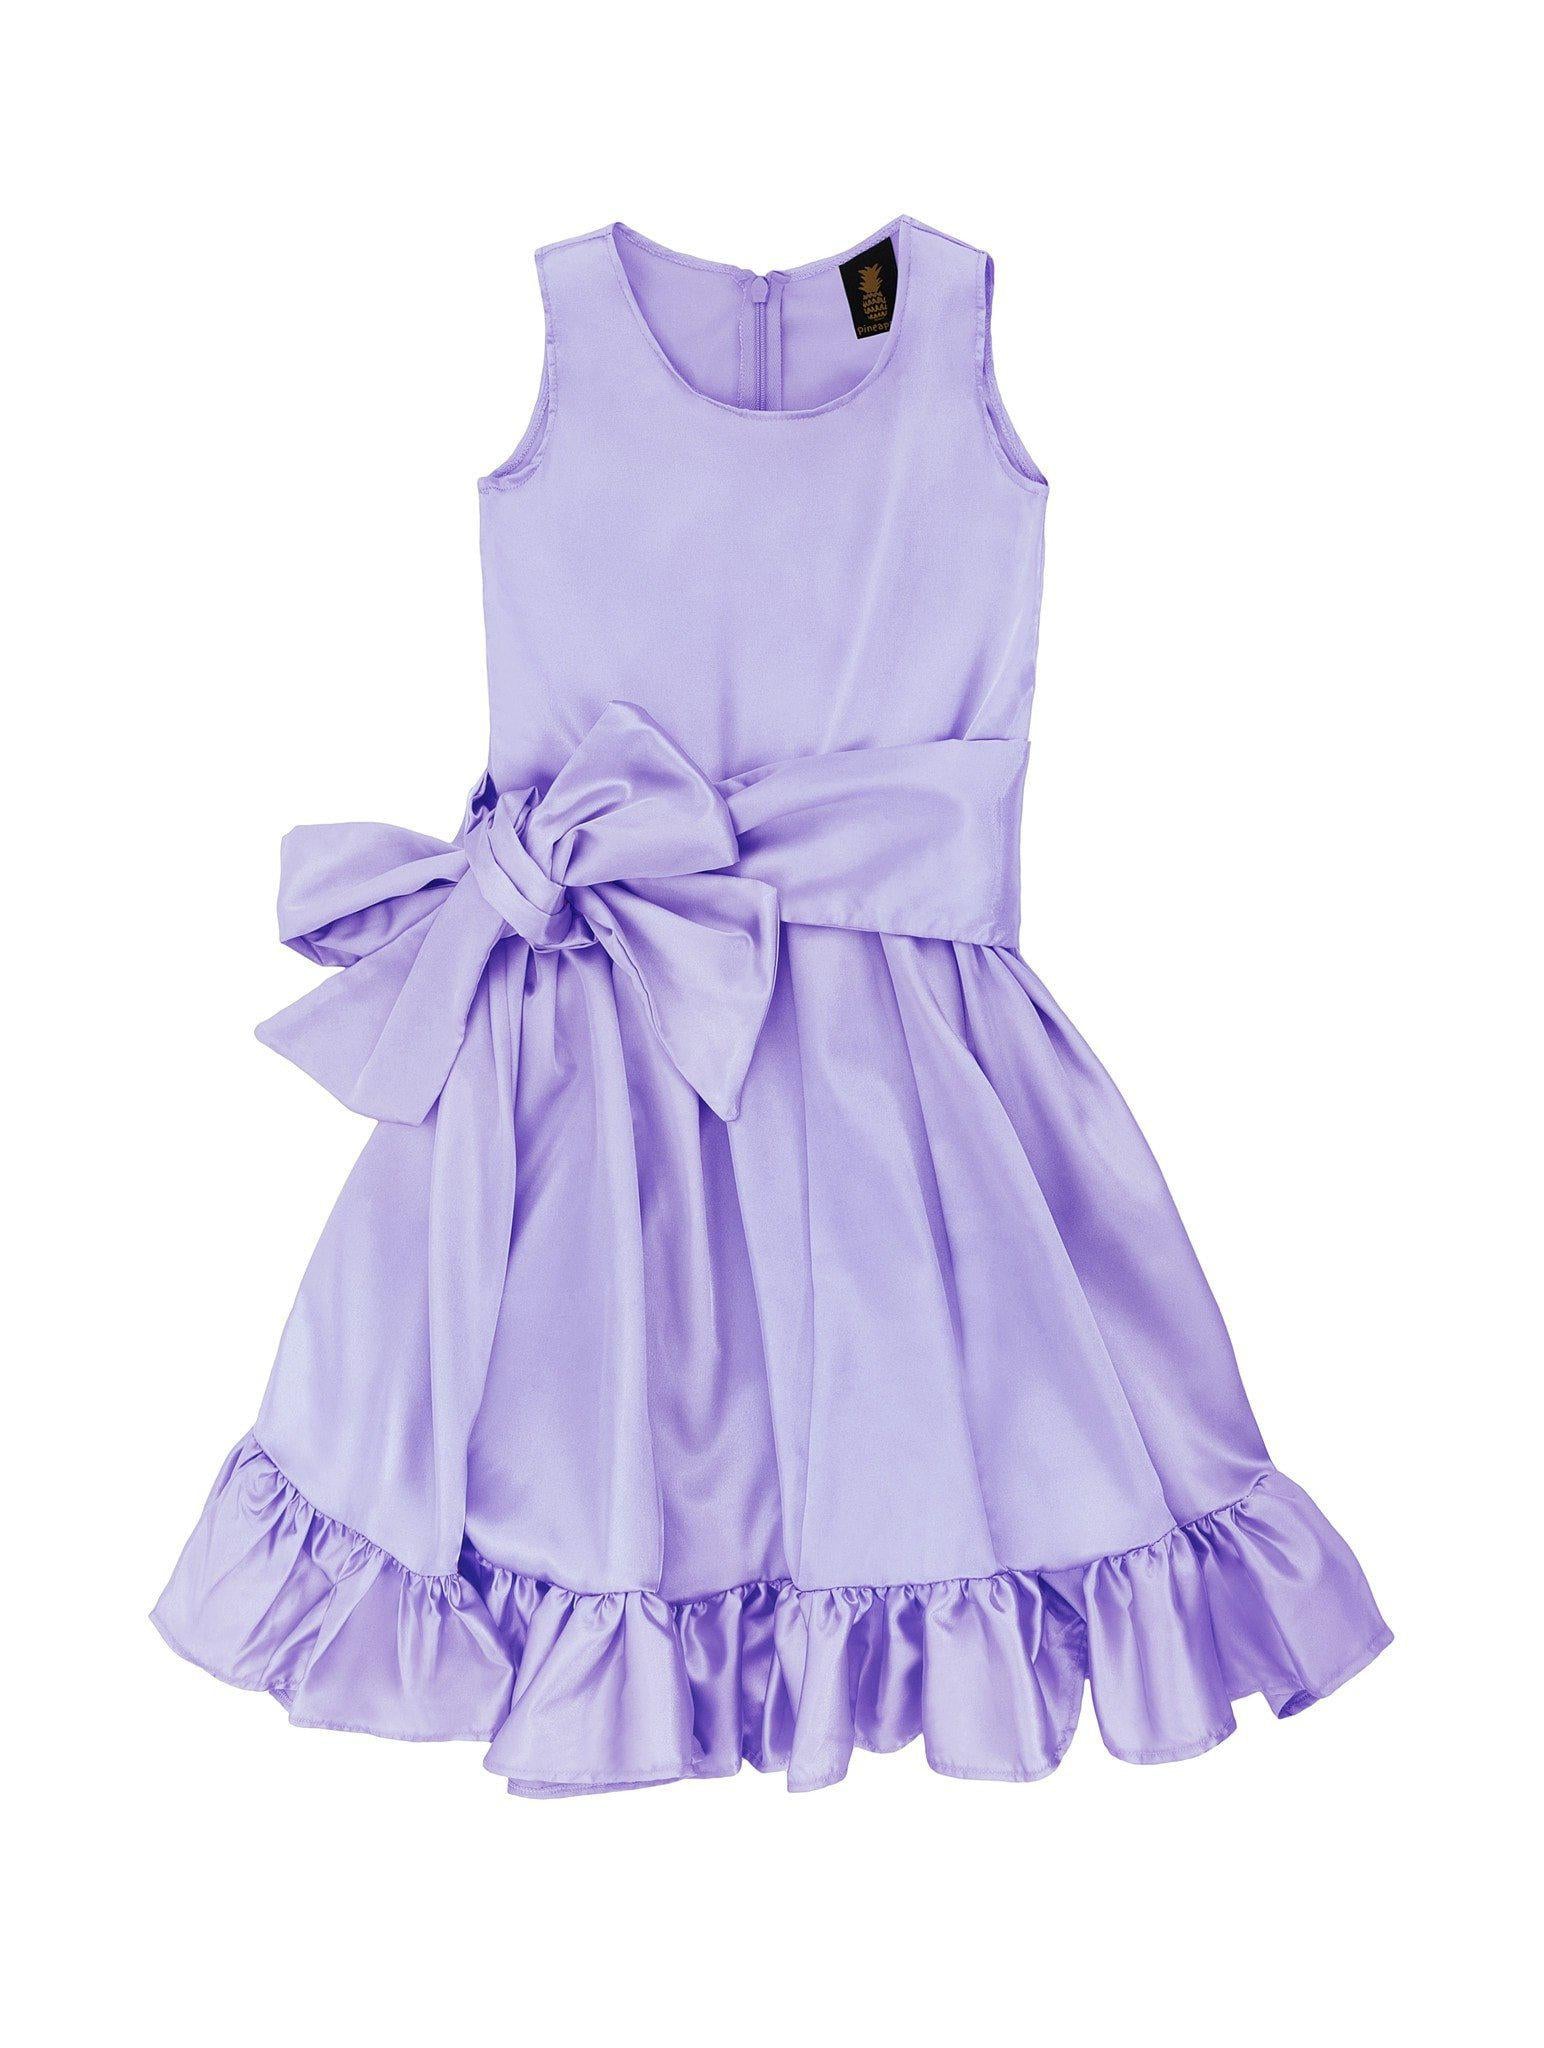 Lavender Fit & Flare Summer Party Midi Princess Dress Flower Girl - Pineapple Clothing